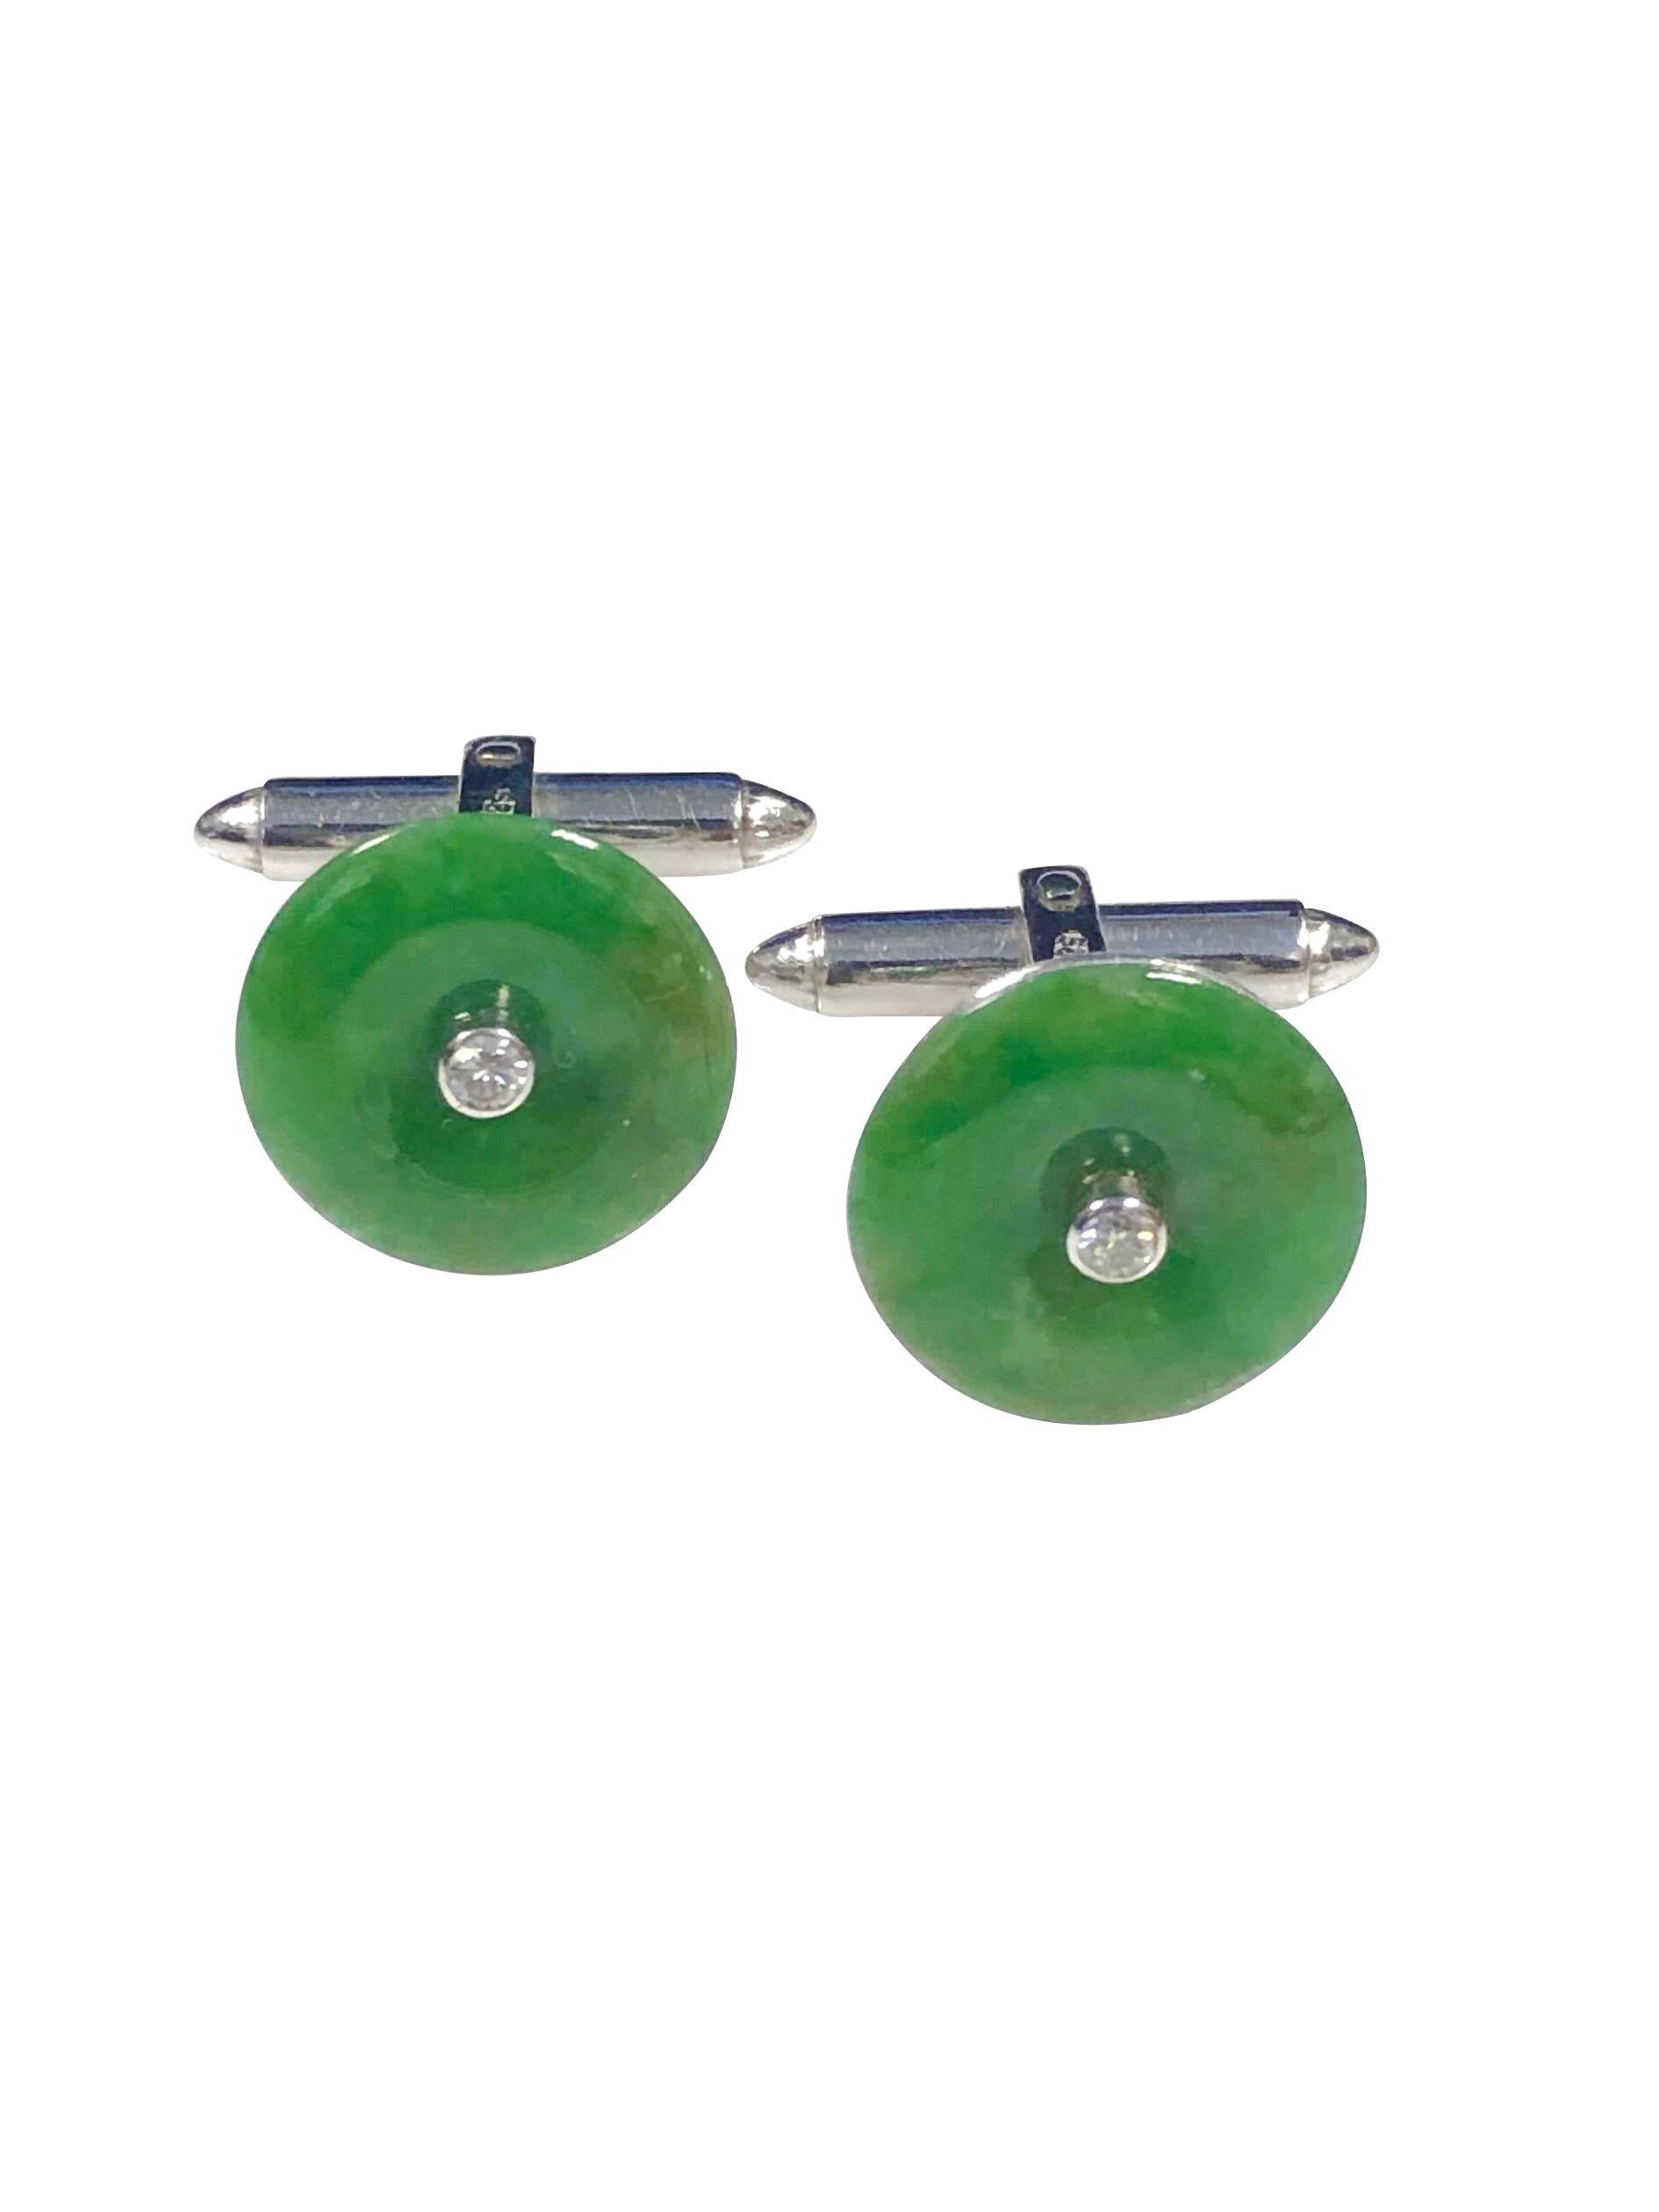 Circa 1970s Jade Cufflinks, set in 18K White Gold and Having Chinese stamping's The Jade tops measure 5/8 inch in diameter and are centrally set with .05 Carat Round Brilliant cut Diamond. The Jade is Natural untreated and Grades as A. The Cufflinks